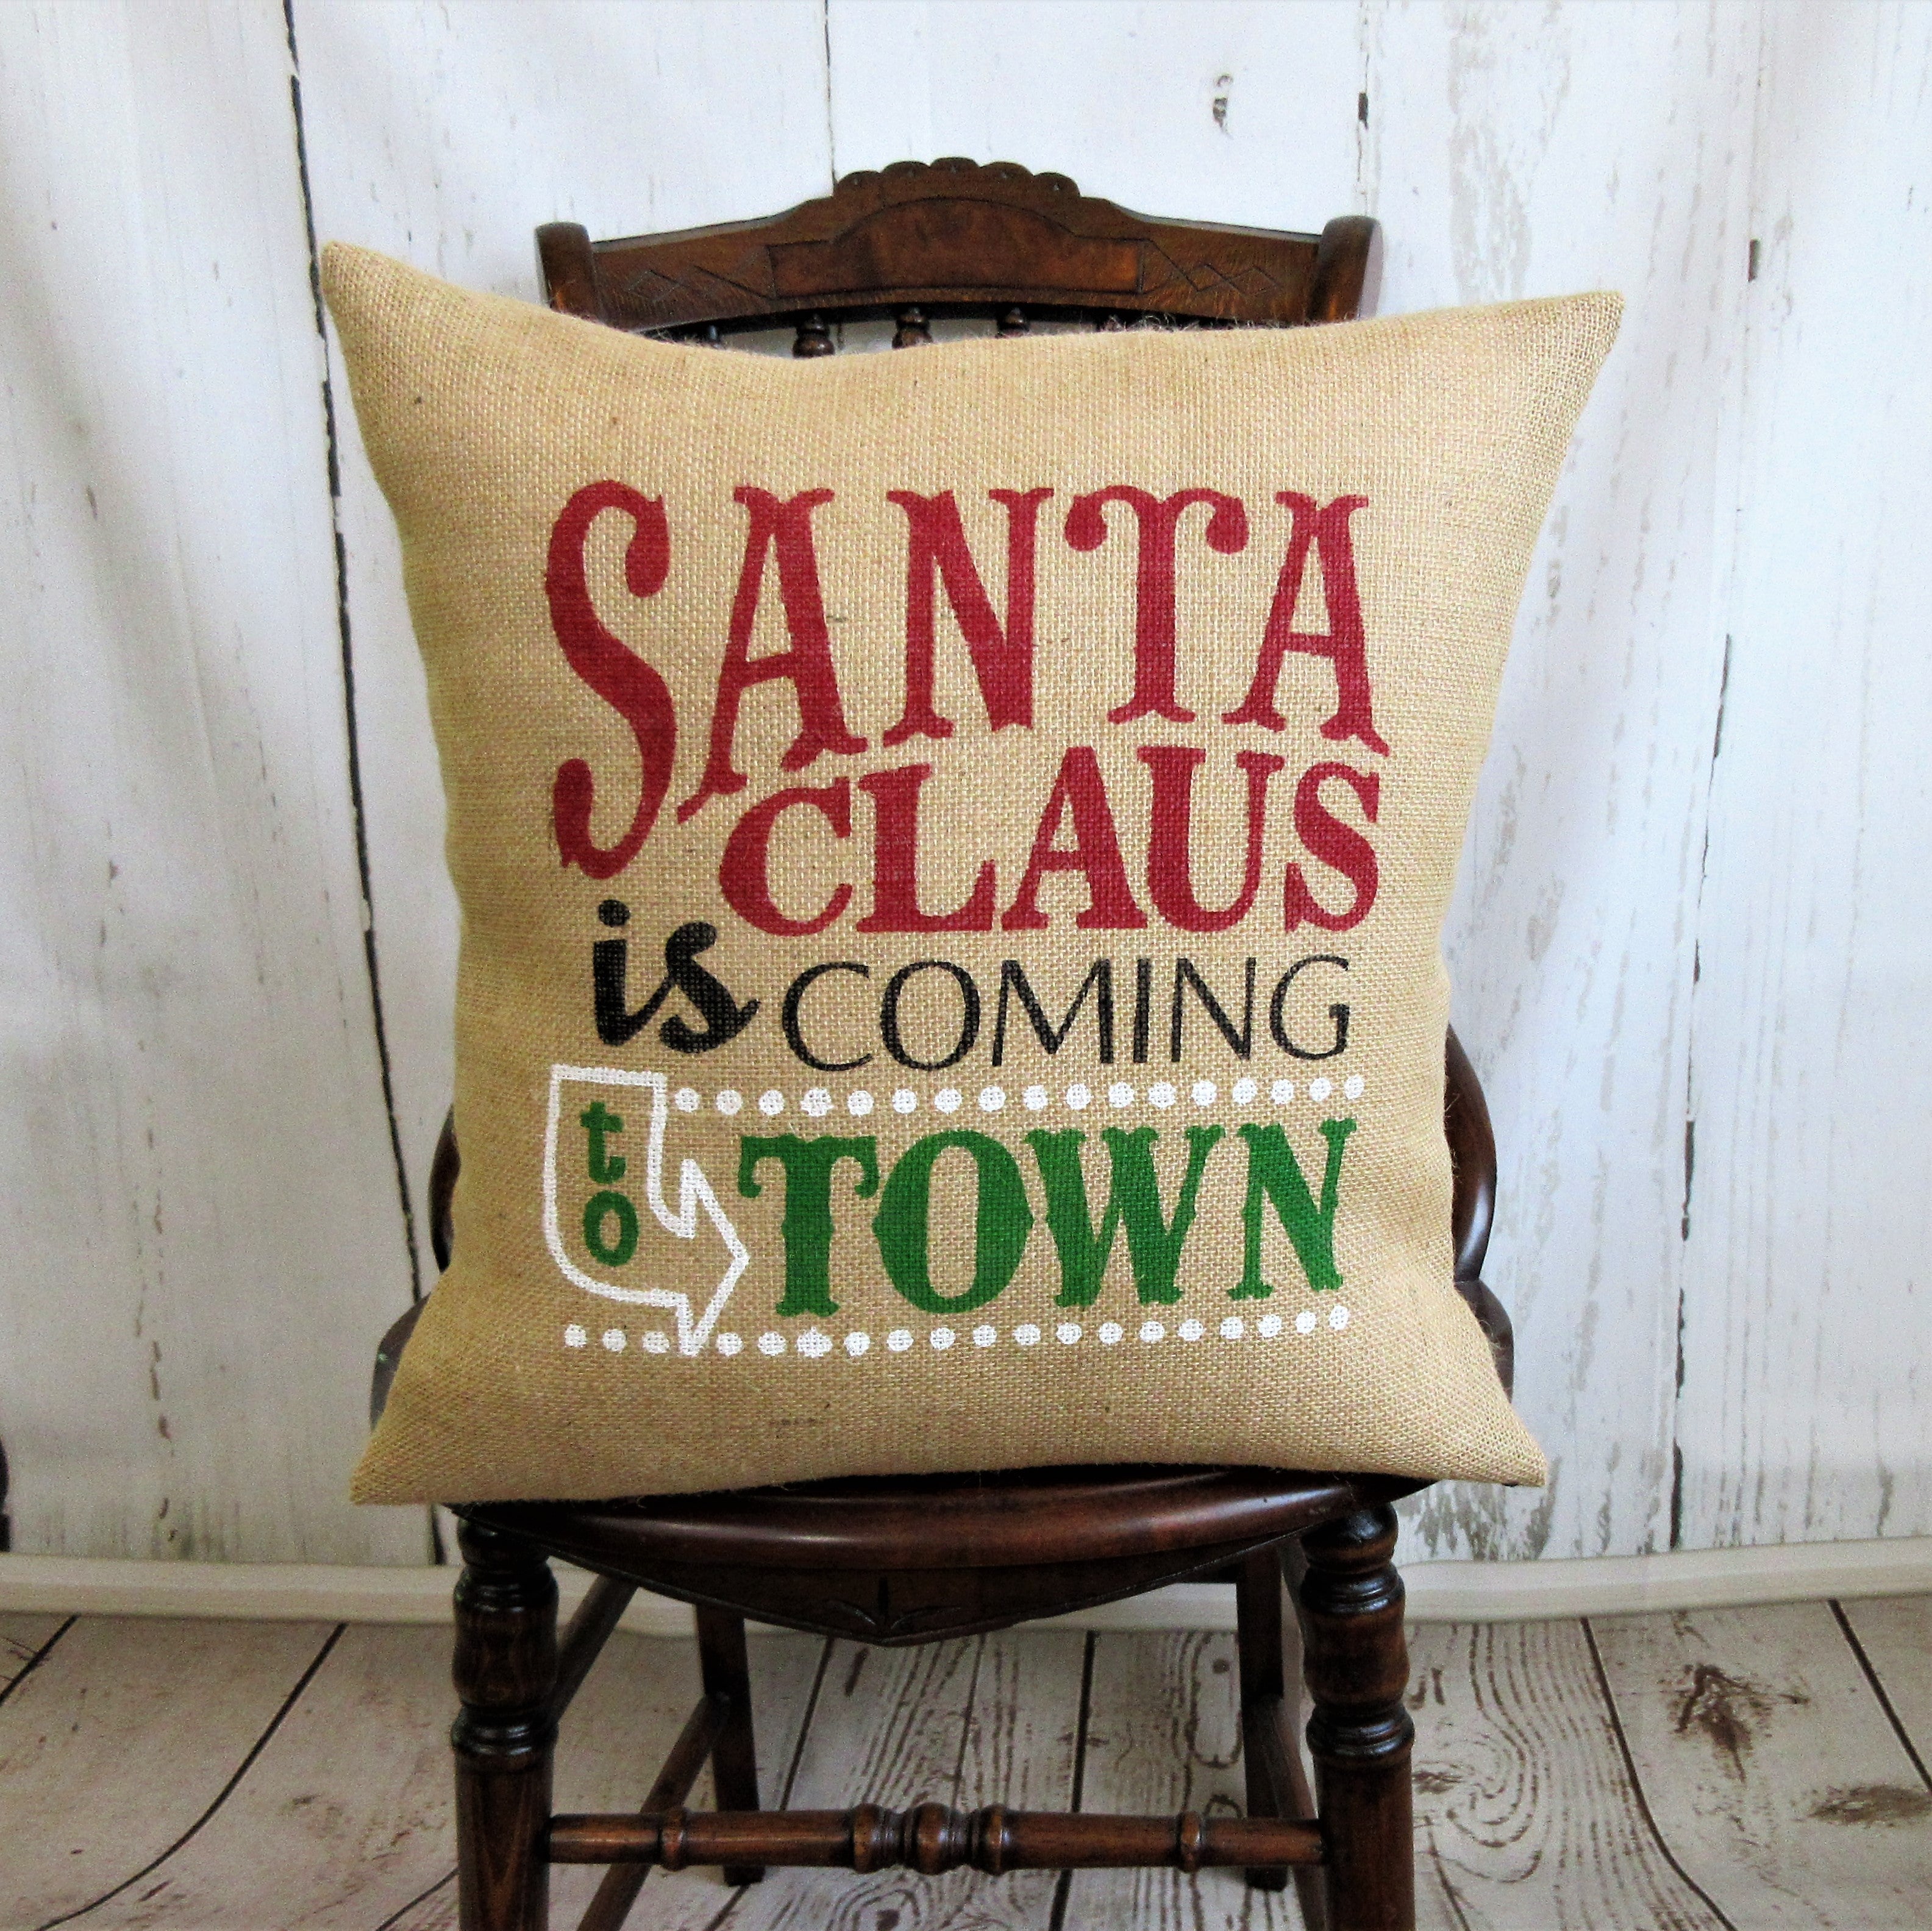 Santa Claus is coming to town Burlap pillow cover